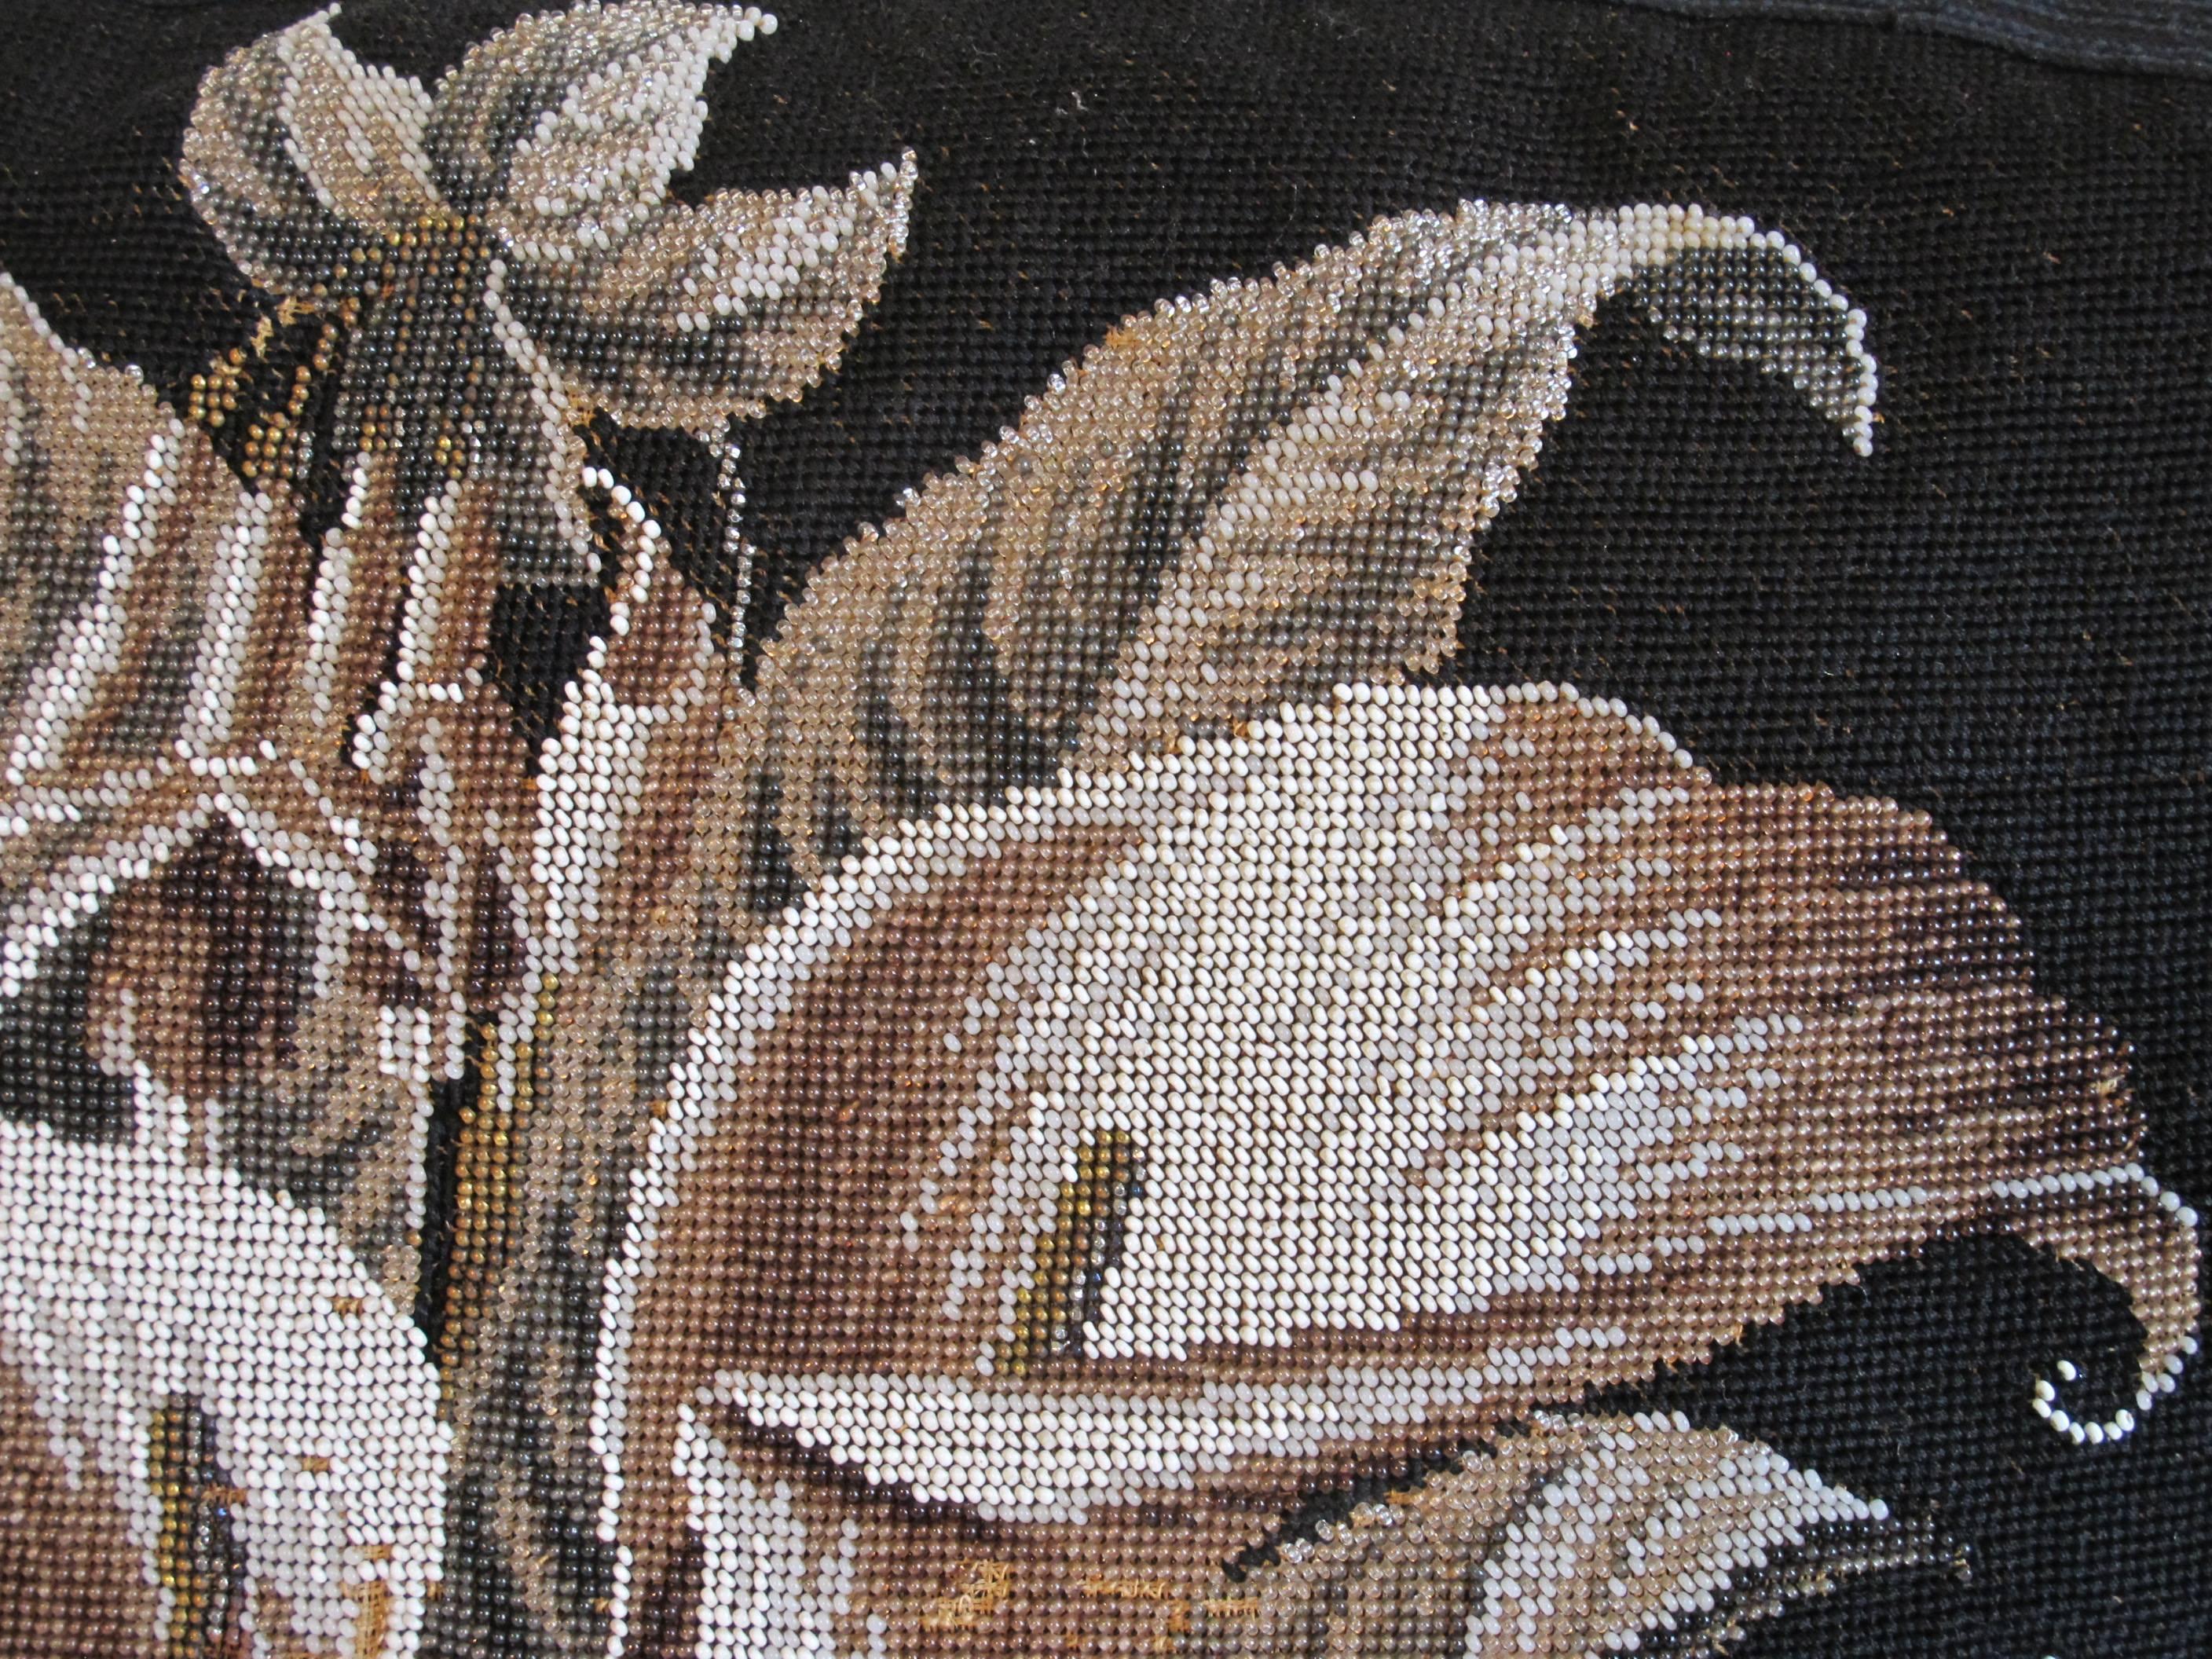 An early Berlin work beaded needlepoint pillow, depicting a glorious bouquet of lilies in shades of black, white, and silver. Edged and backed with silver silk velvet. Down insert is included.